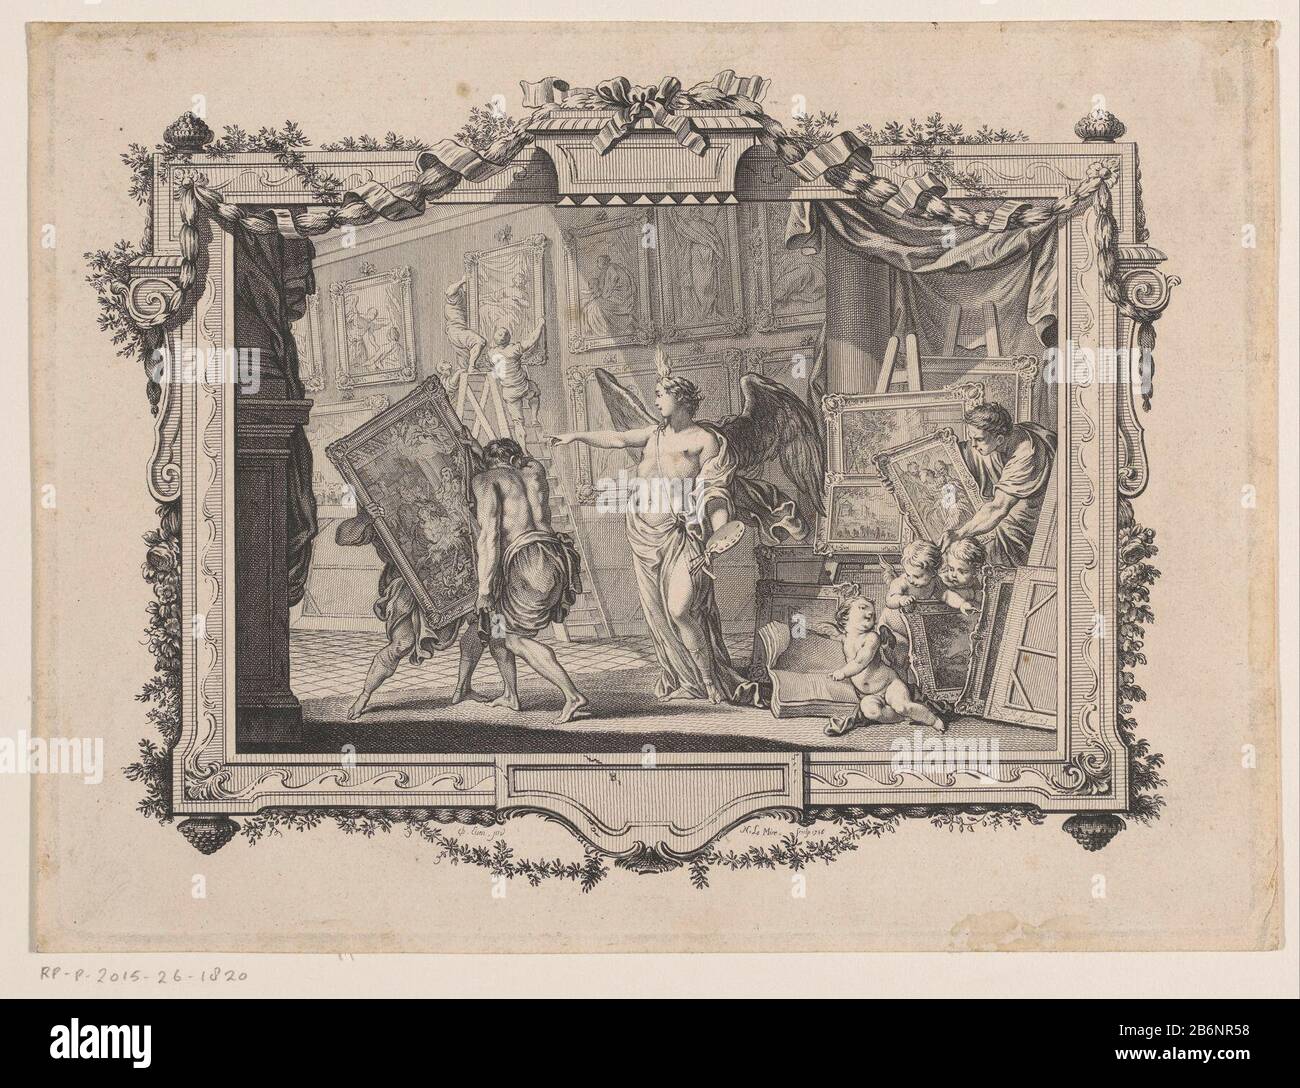 briefpapier Bijproduct Prestatie Genie van de Schilderkunst arrangeert schilderijen Interior of an art  collection with the Painting Genie recommend handing two men lifting a  painting. Right three putti and a man surrounded by paintings. One